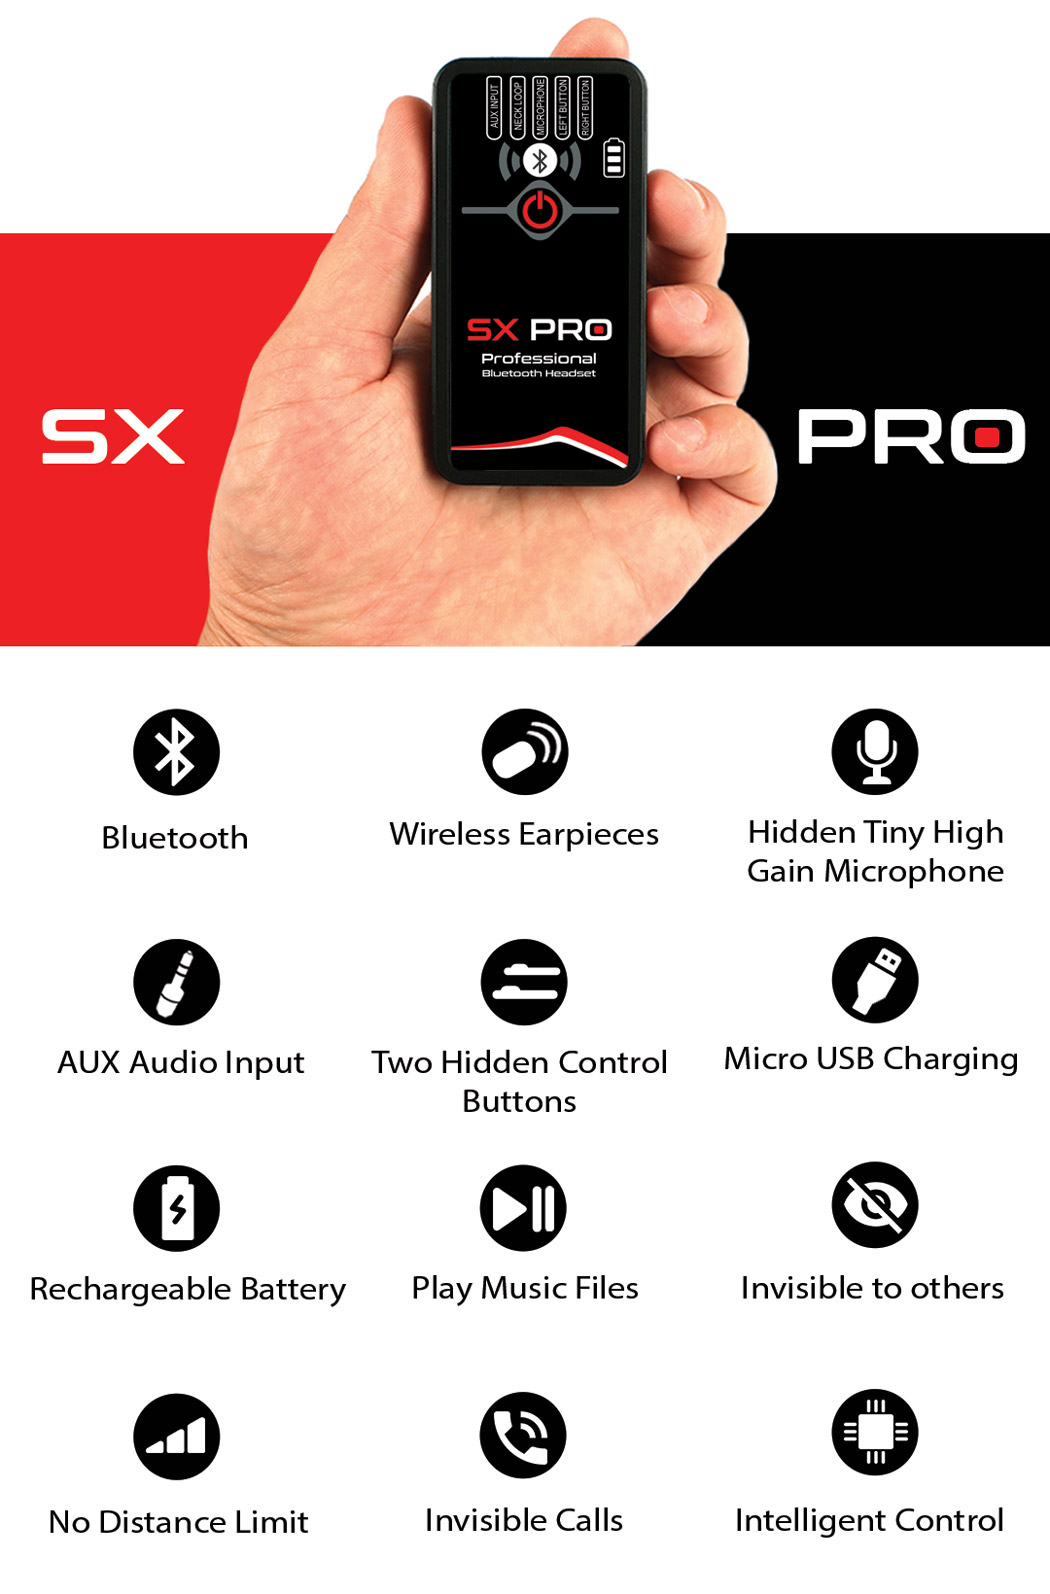 SX PRO offers Bluetooth Connection, Wireless Earpieces, a Tiny High-Gain Microphone, Hidden Control Buttons allowing to Place Invisible Unnoticeable Calls, Play Audio Recordings Music, AUX Input and much more.